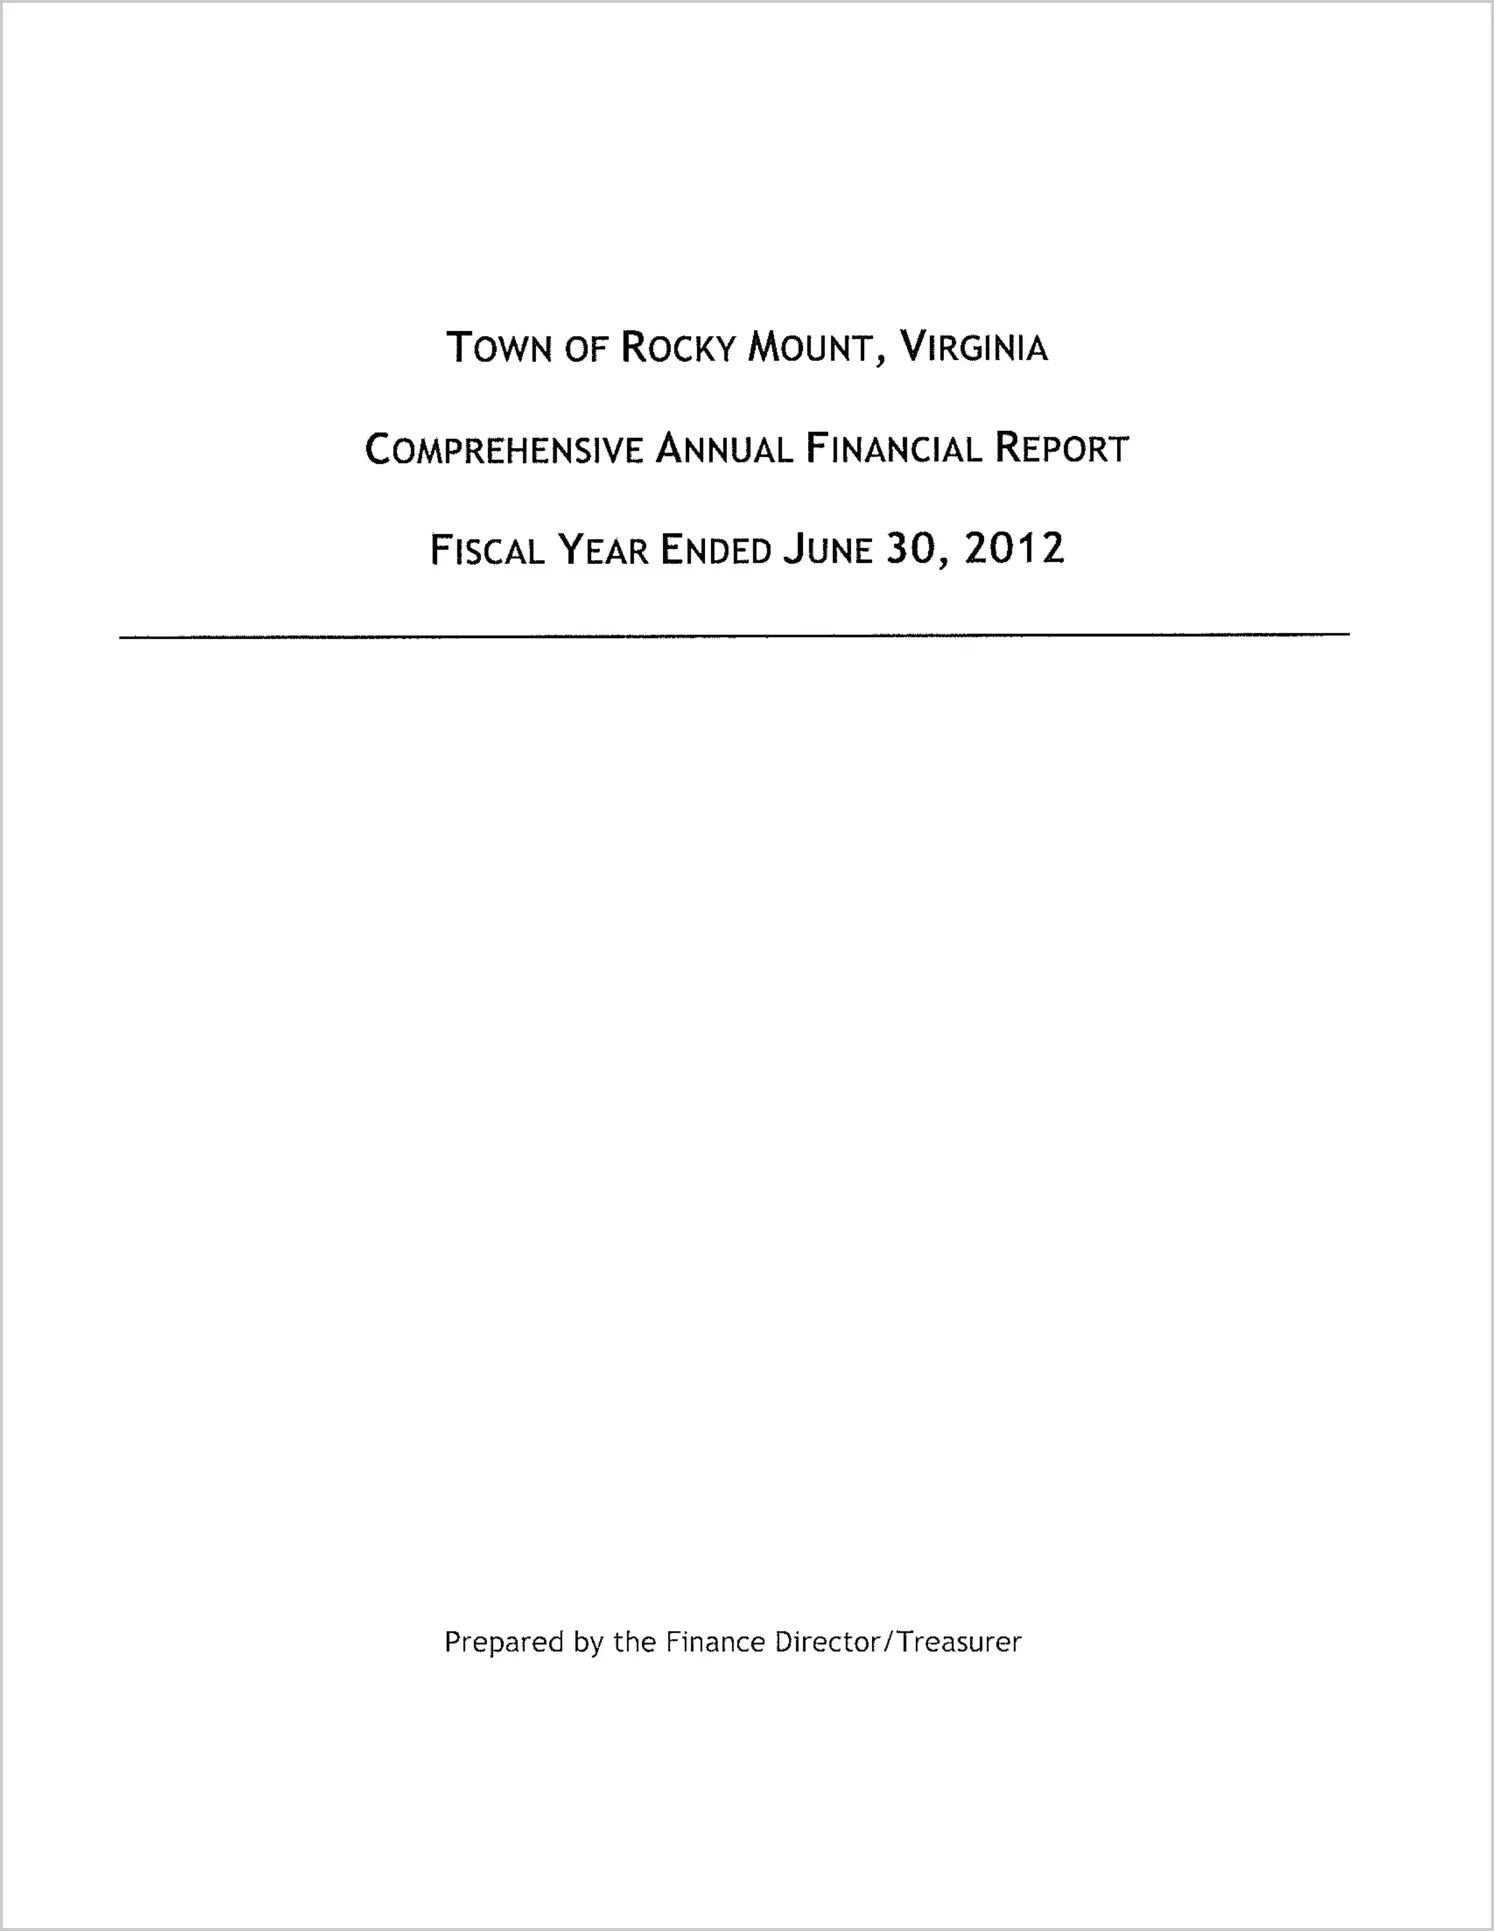 2012 Annual Financial Report for Town of Rocky Mount